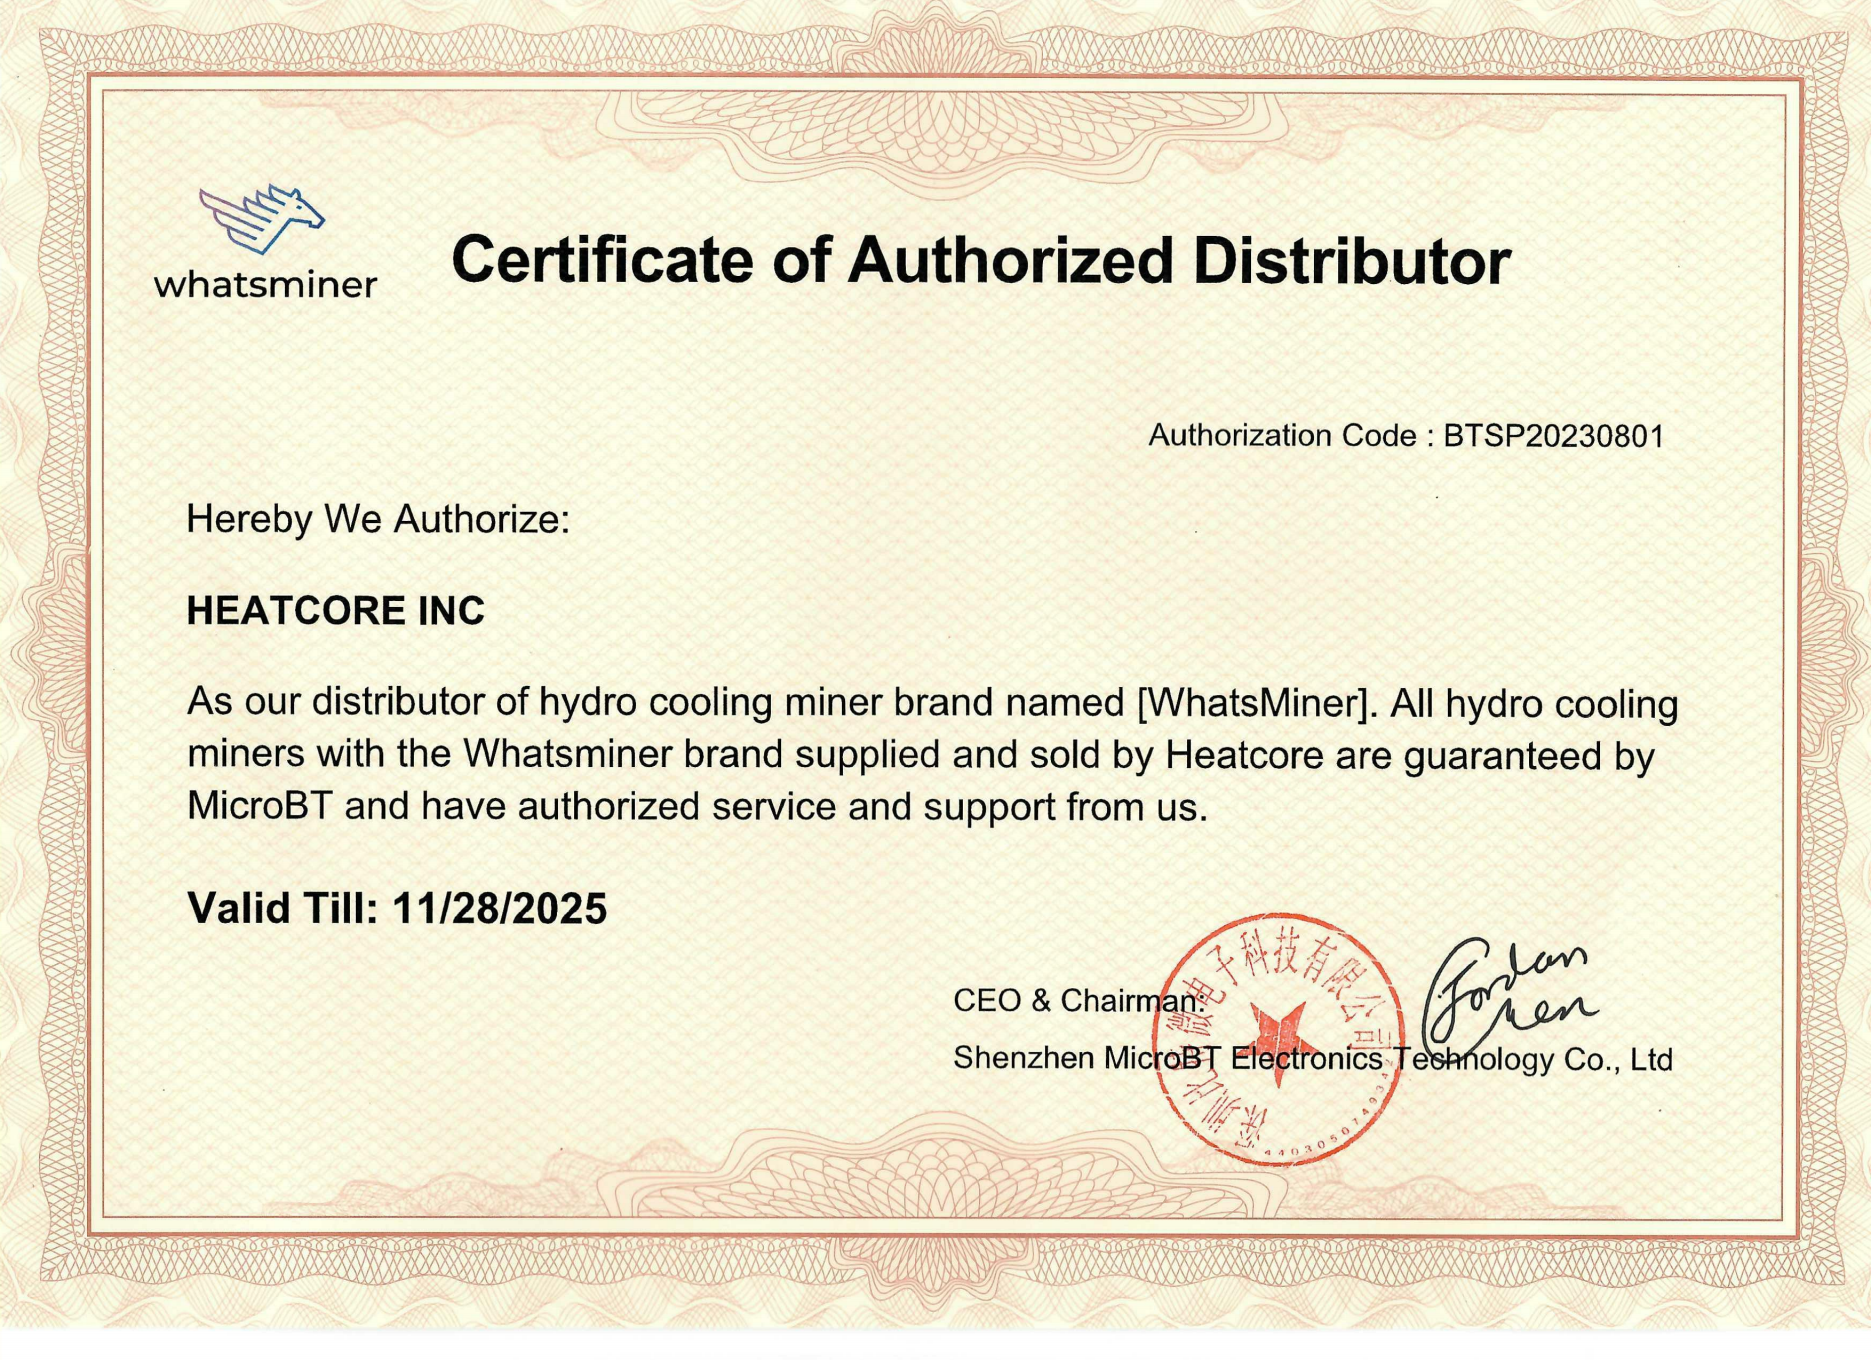 HeatCore Official Certificate of Authorized Distributor